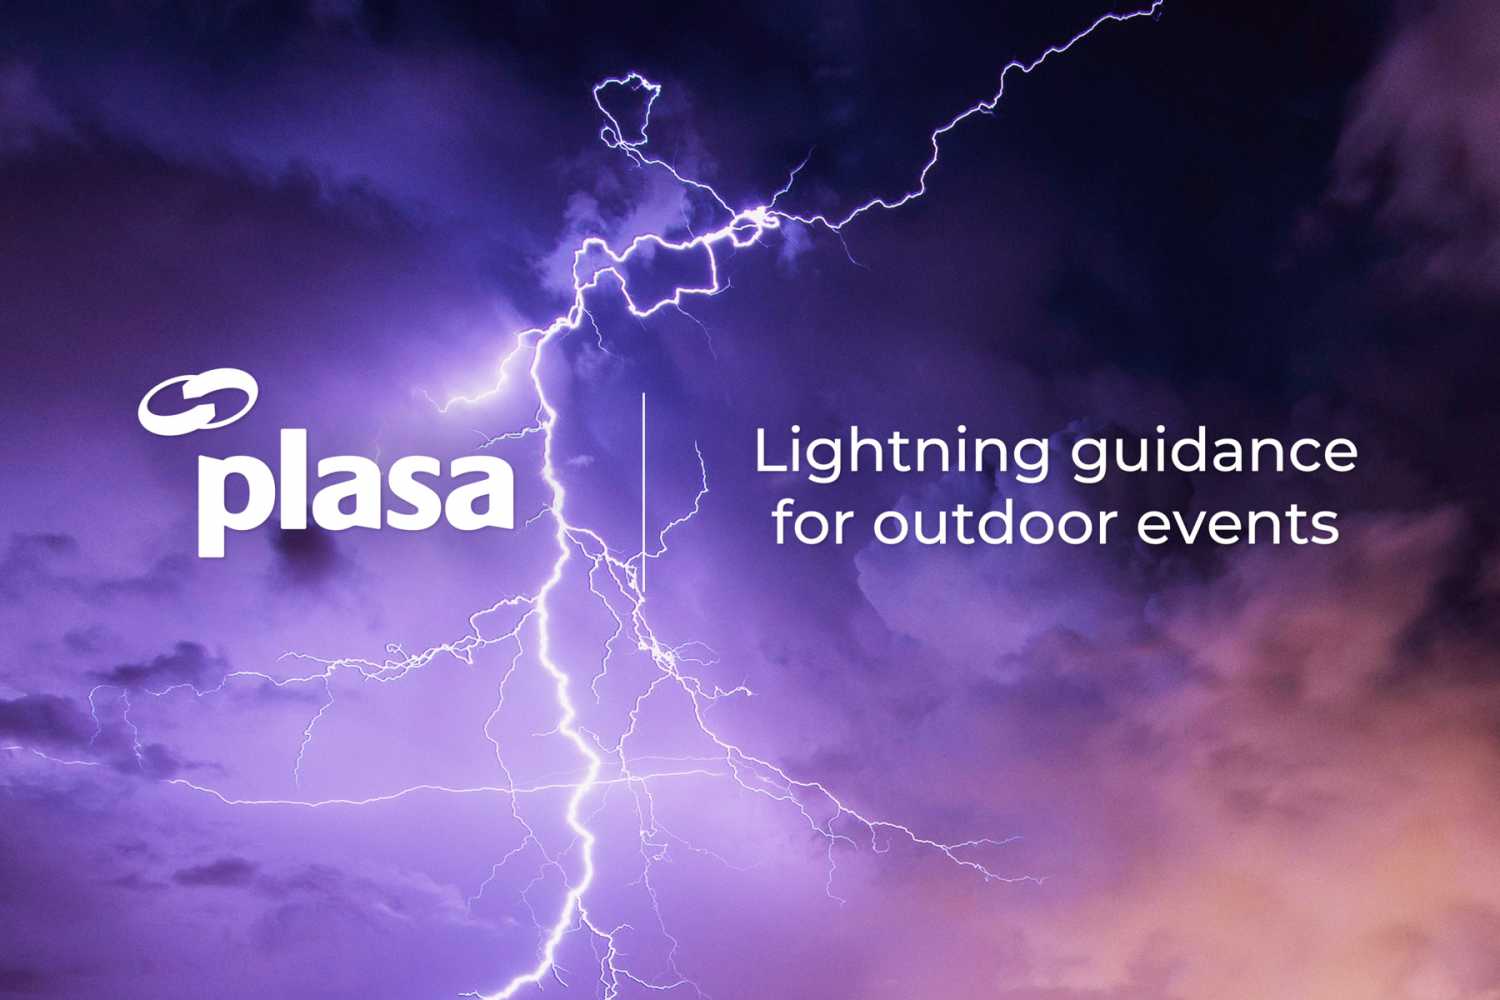 The Lightning Guidance for Outdoor Events aims to assist all those involved with the production and management of outdoor events